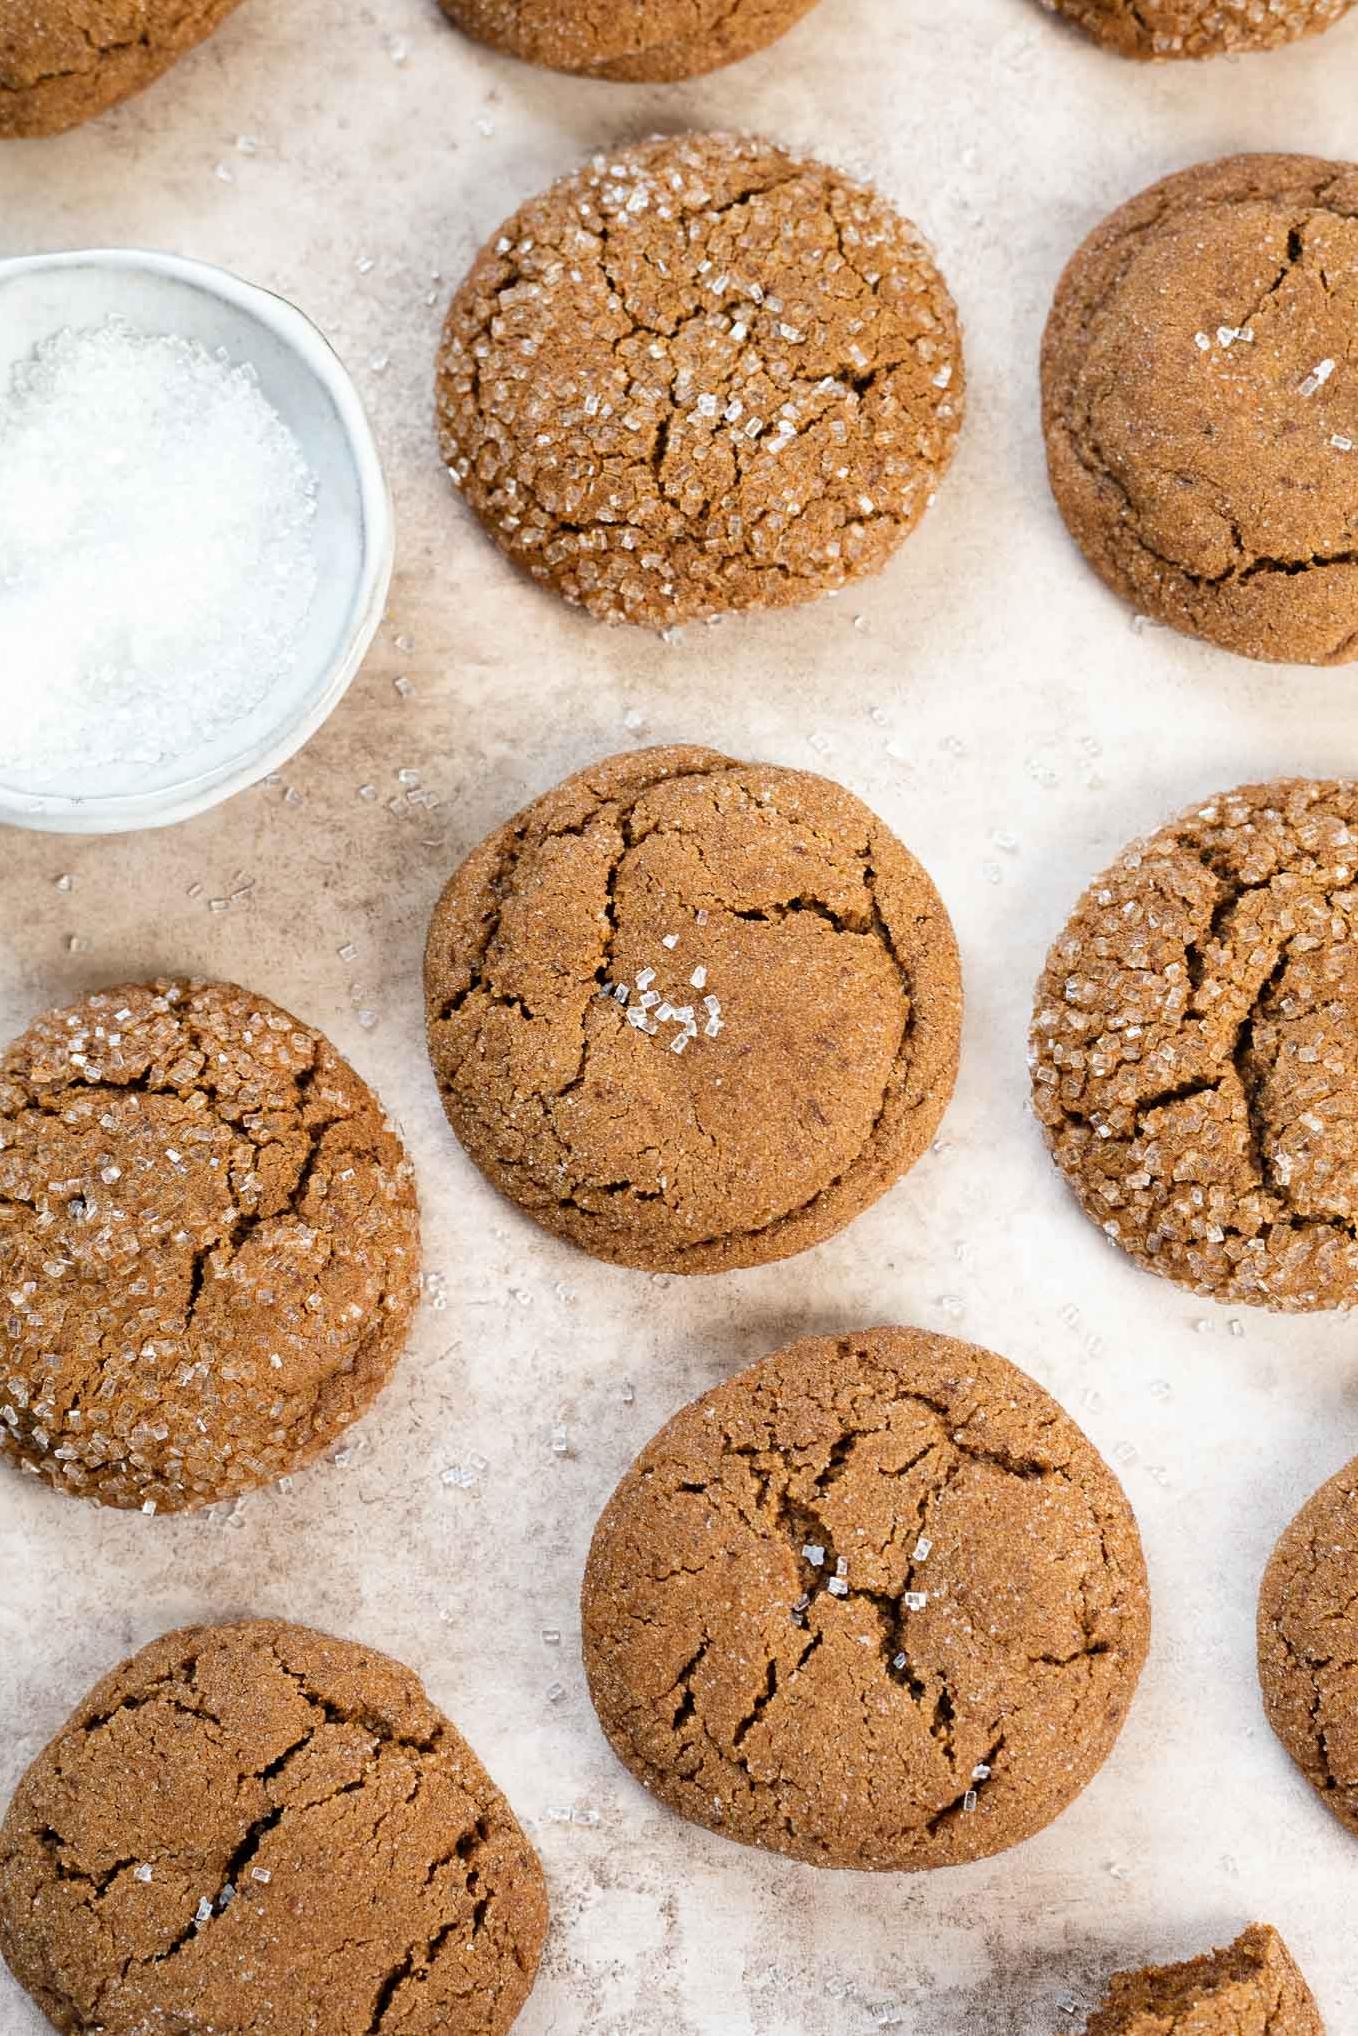  You'll love the aroma of ginger, cinnamon, and nutmeg as they bake in the oven.